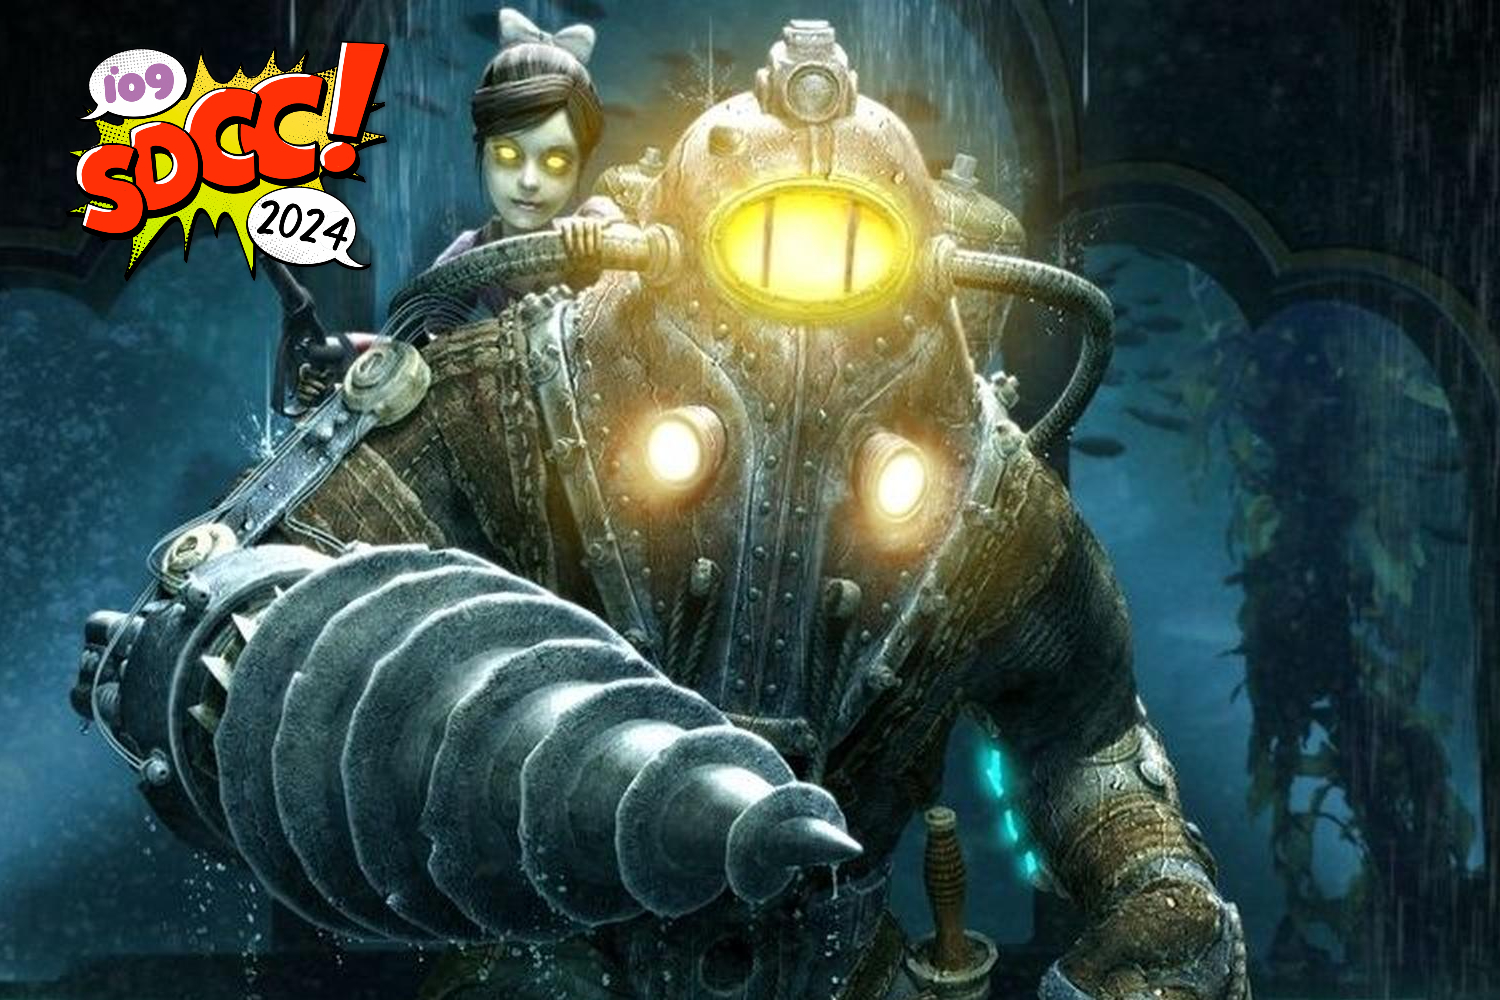 A Big Daddy and Little Sister in key art for 2010's BioShock 2.